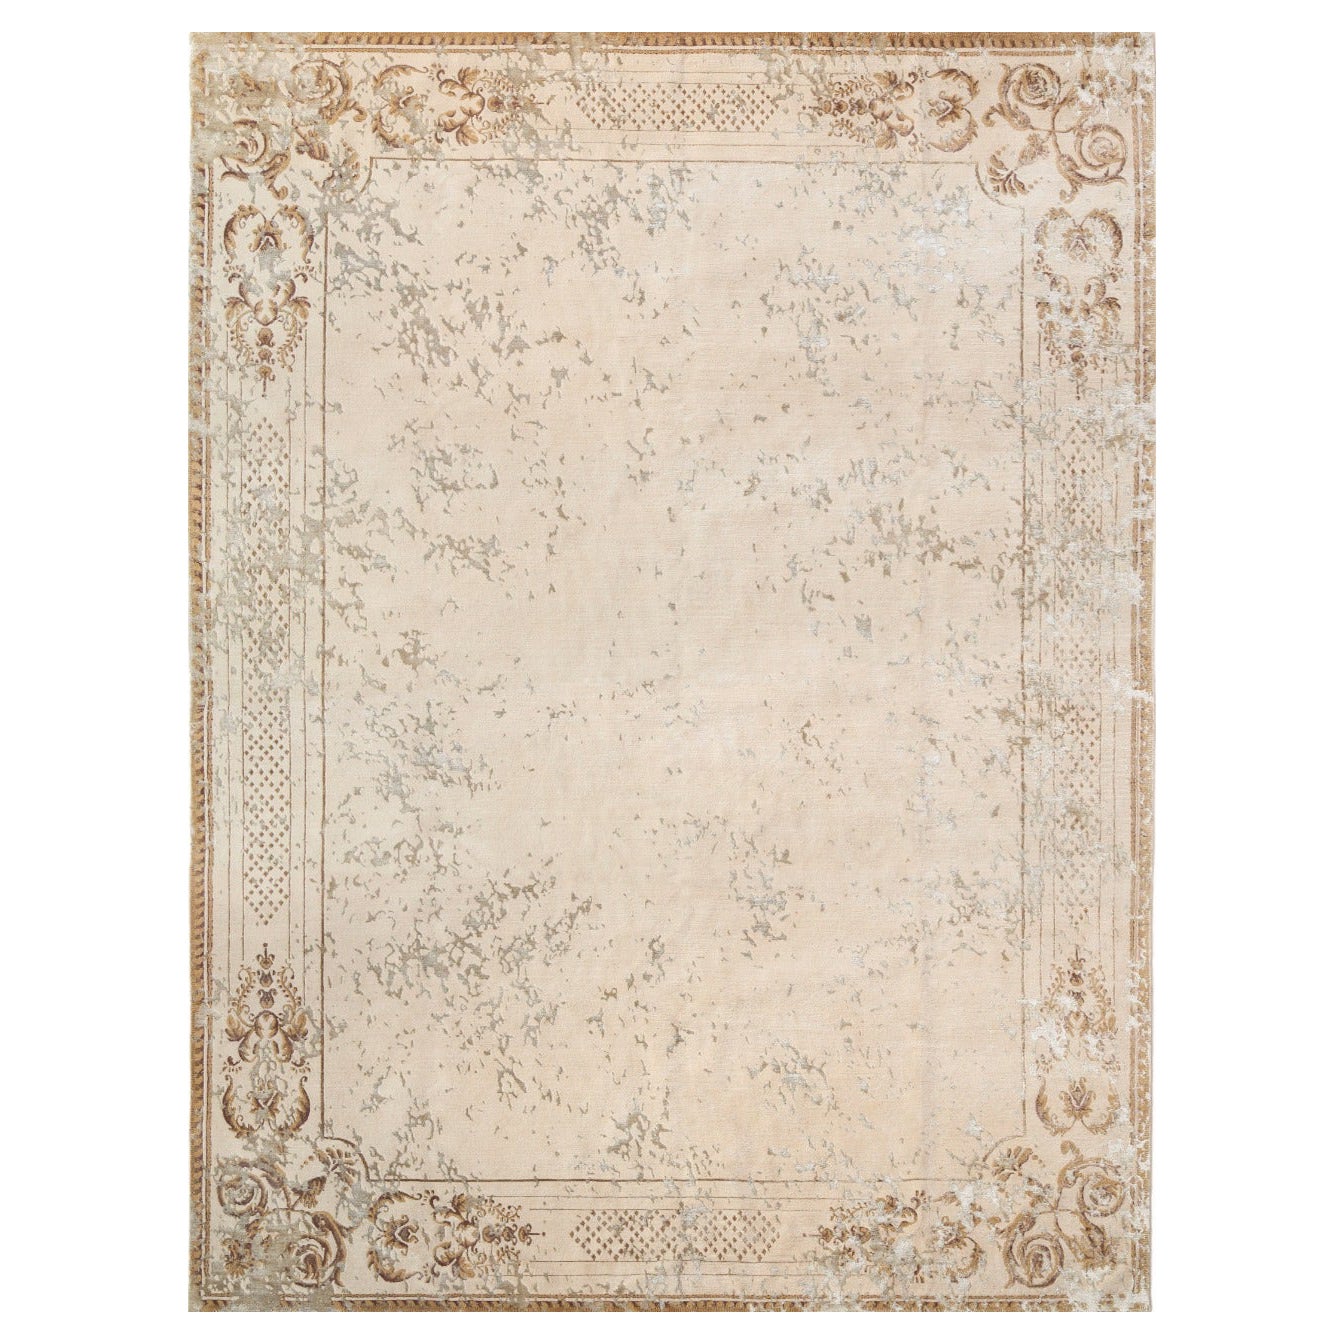 Modern Classic French Rug Floral, Ornate Stucco Antique White, Medium, in Stock For Sale